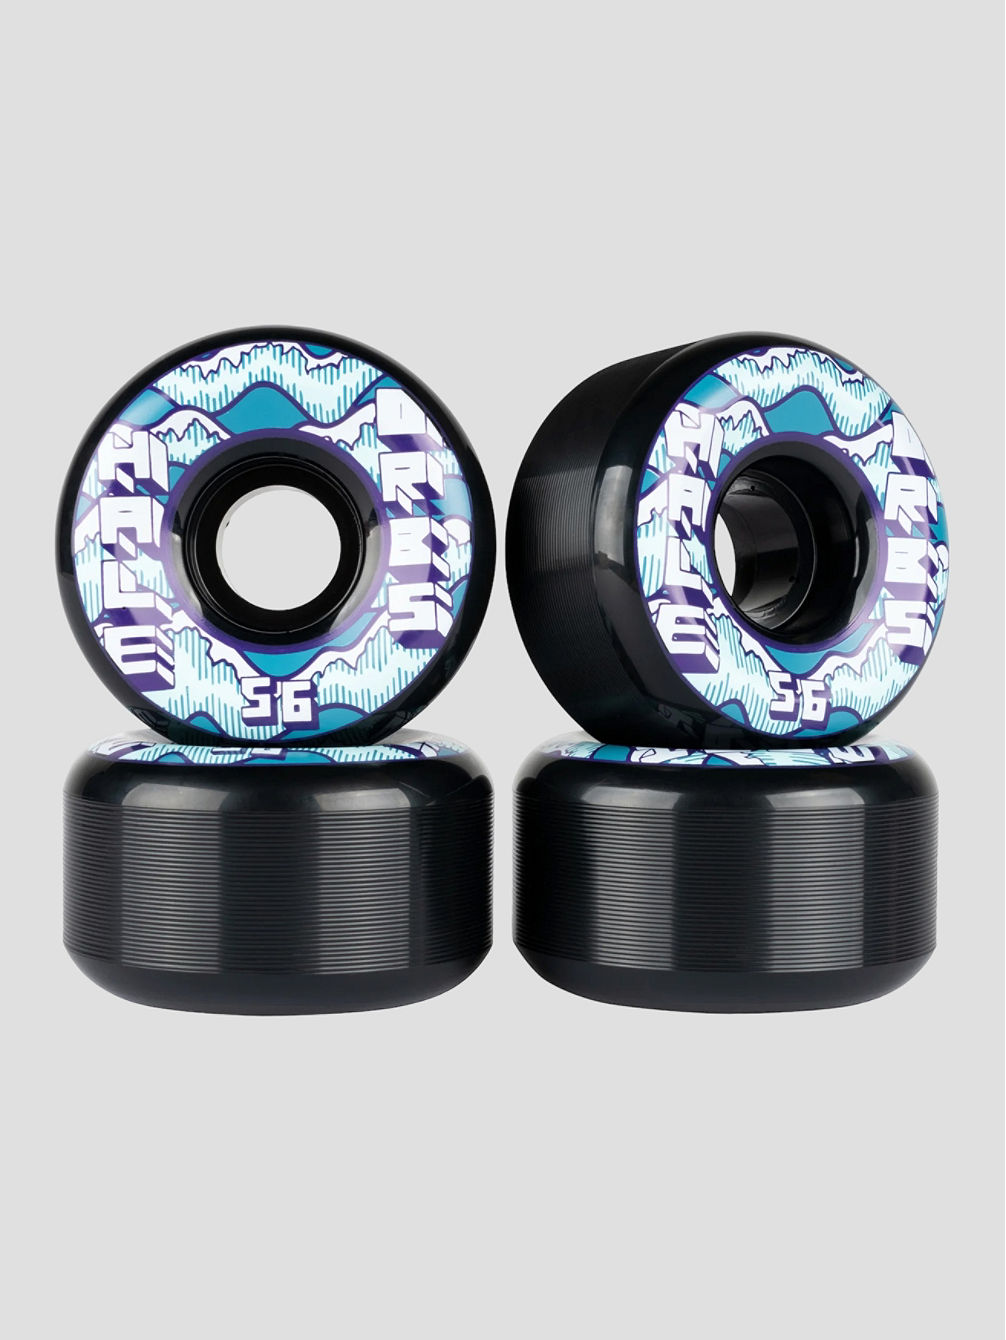 Orbs Shawn Hale Specters Conica 99A 56mm Roues